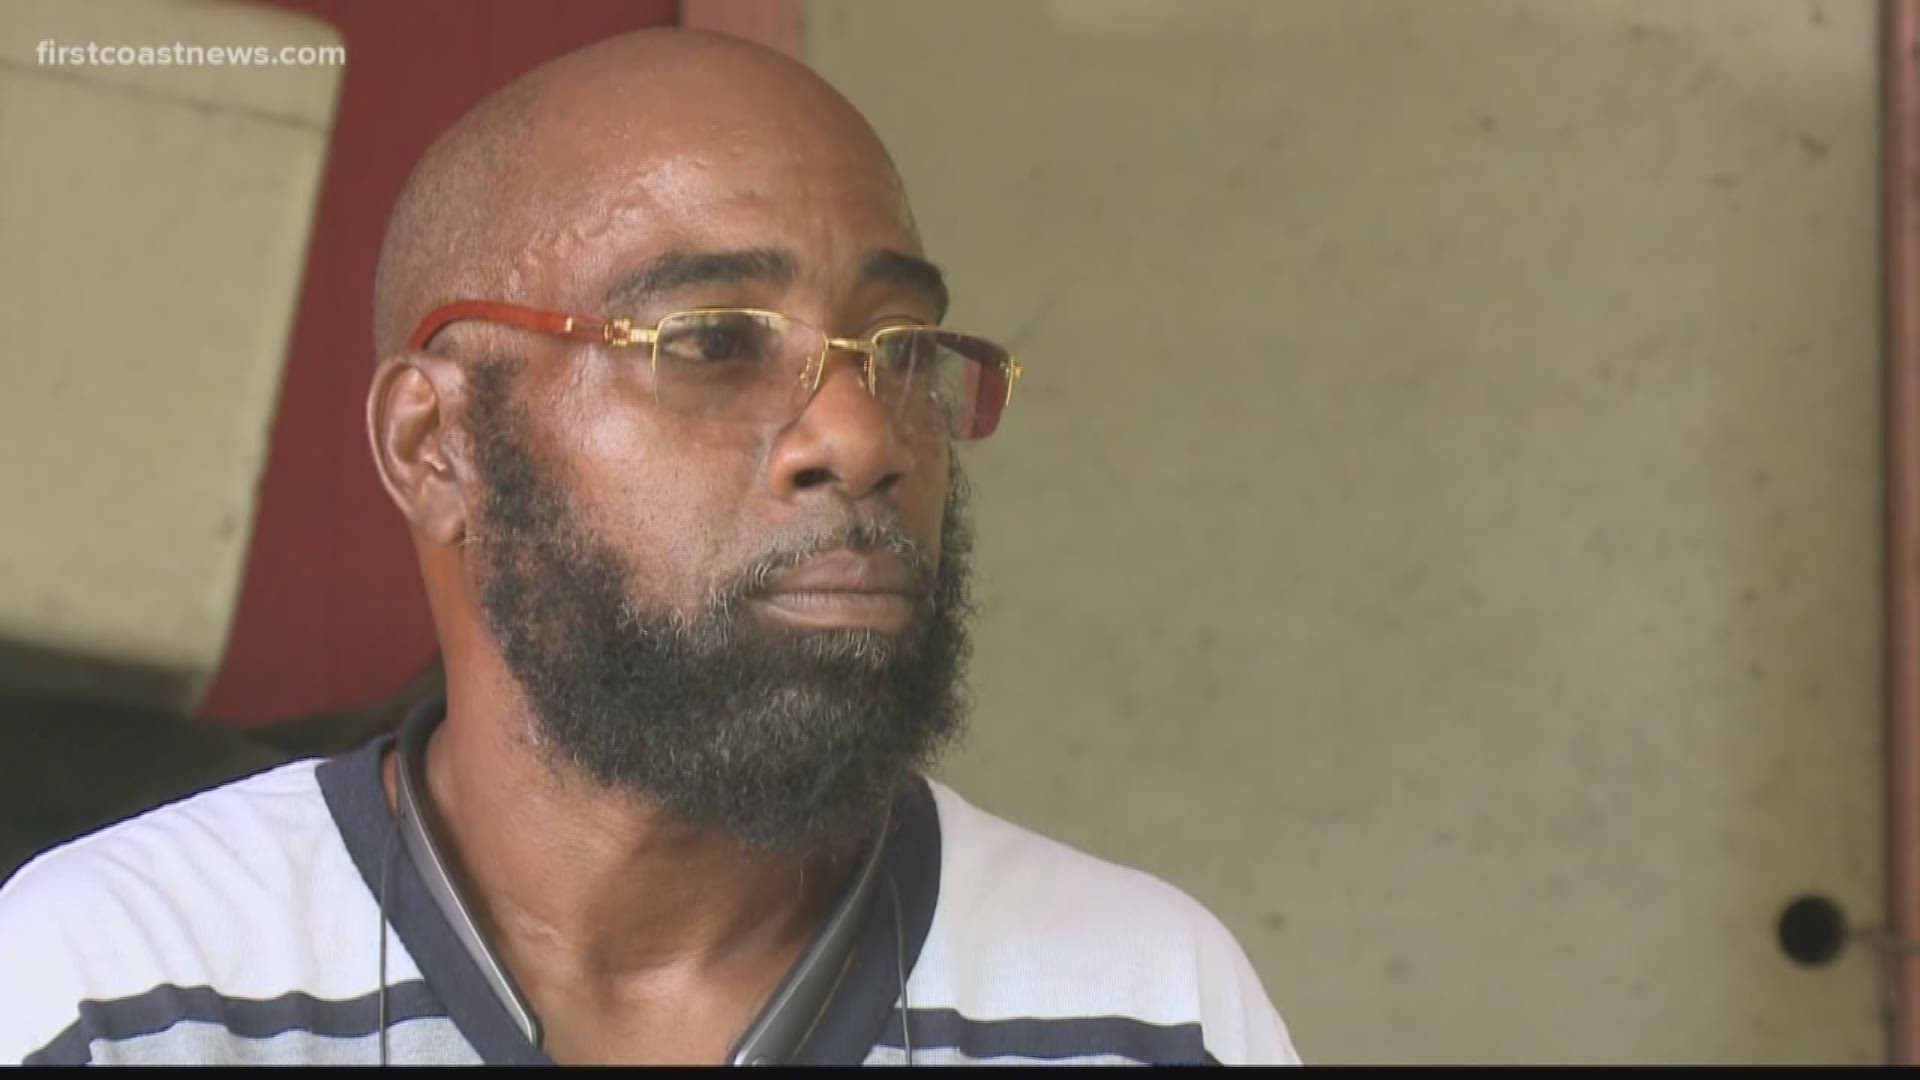 John Mills says the shooting of his 17-year-old son was not gang-related but could have happened out of jealousy.